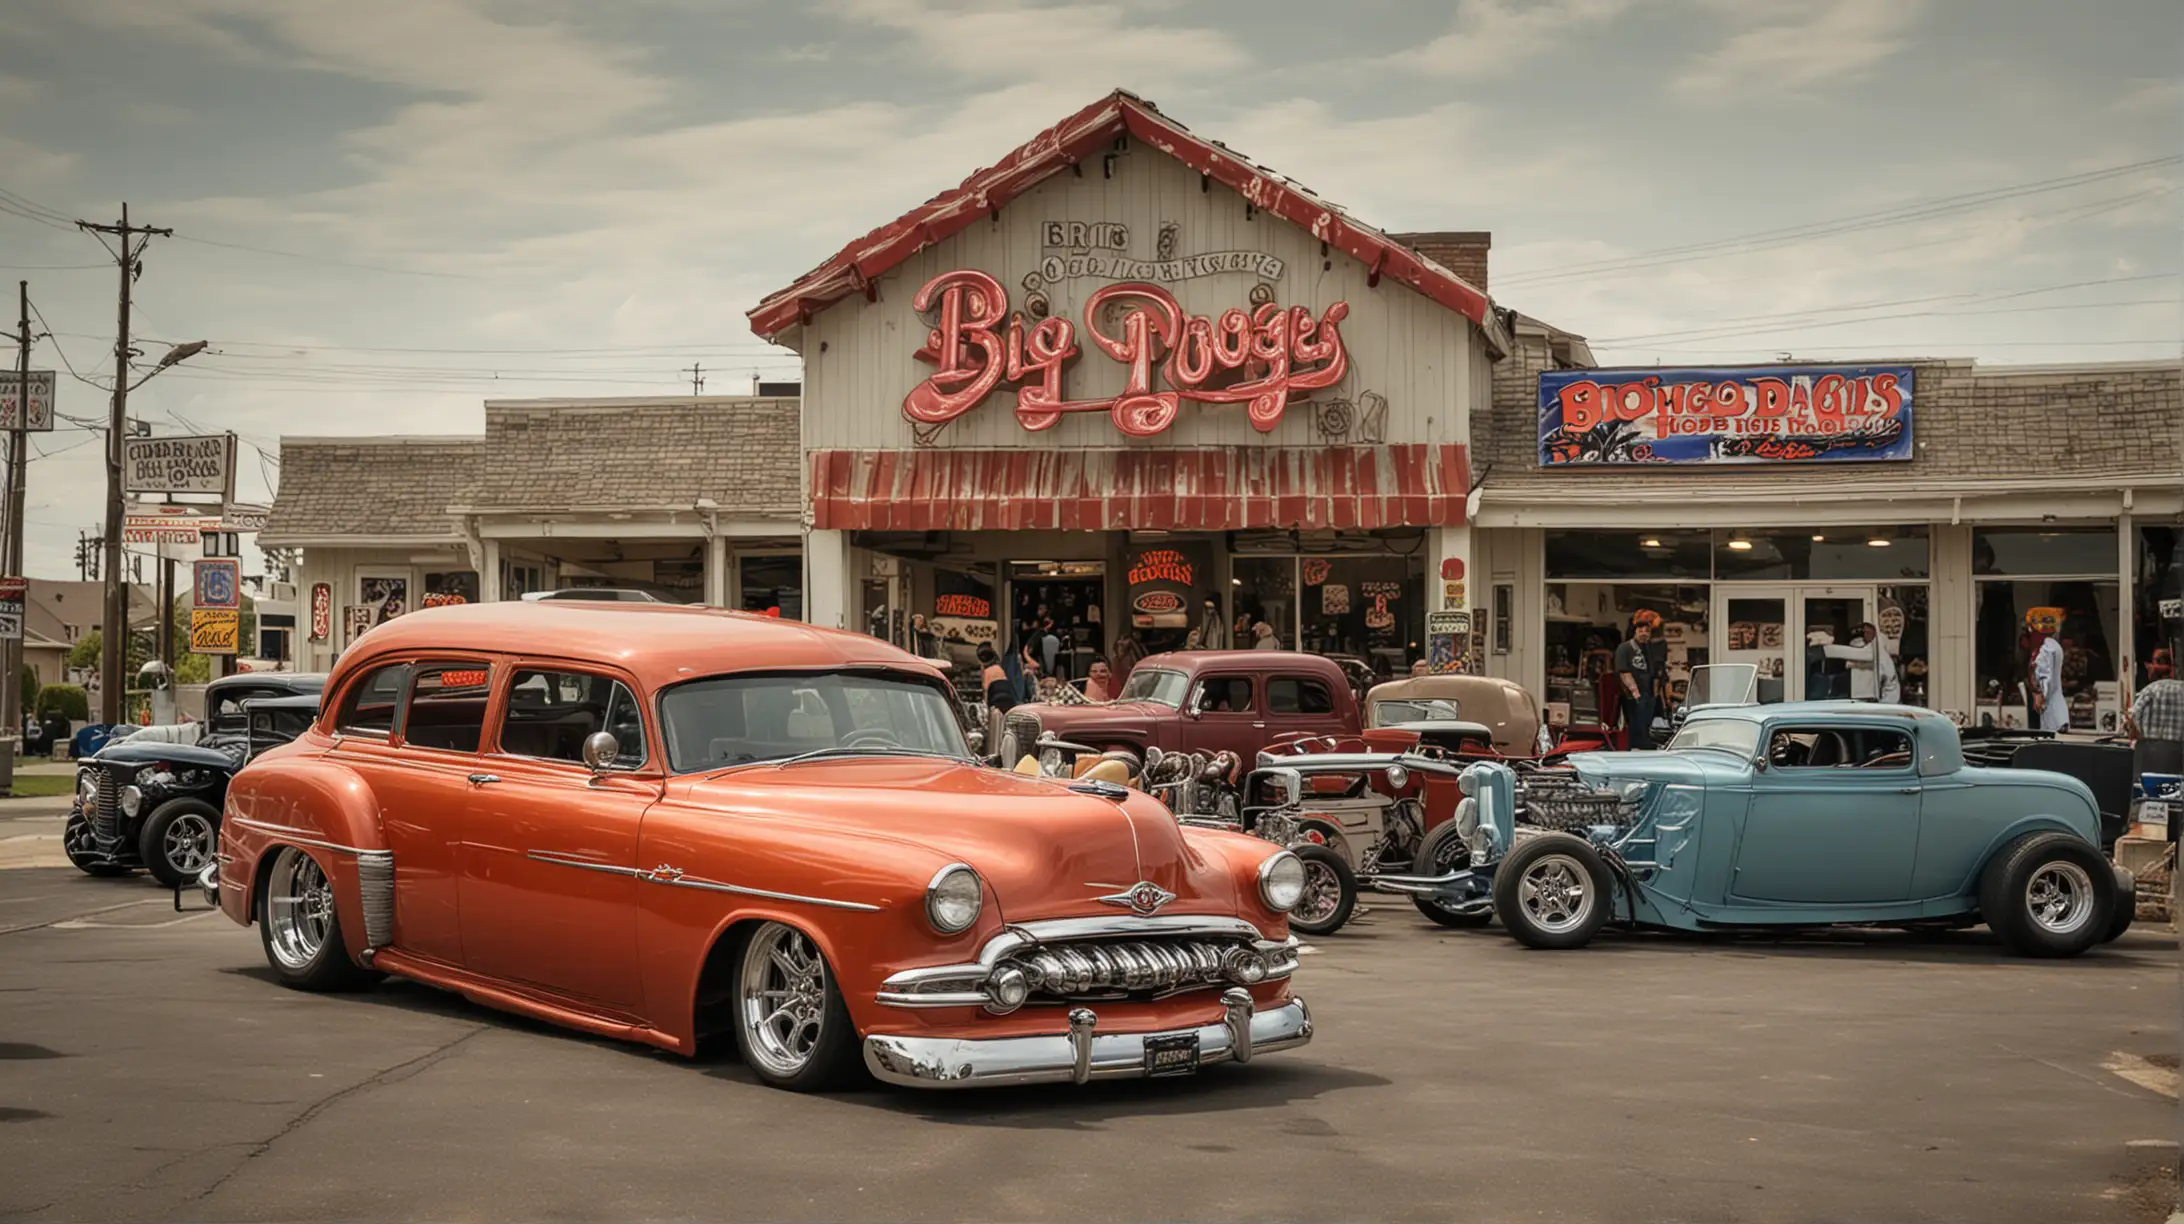 BIG DOGG'S HOUSE OF HOT RODS